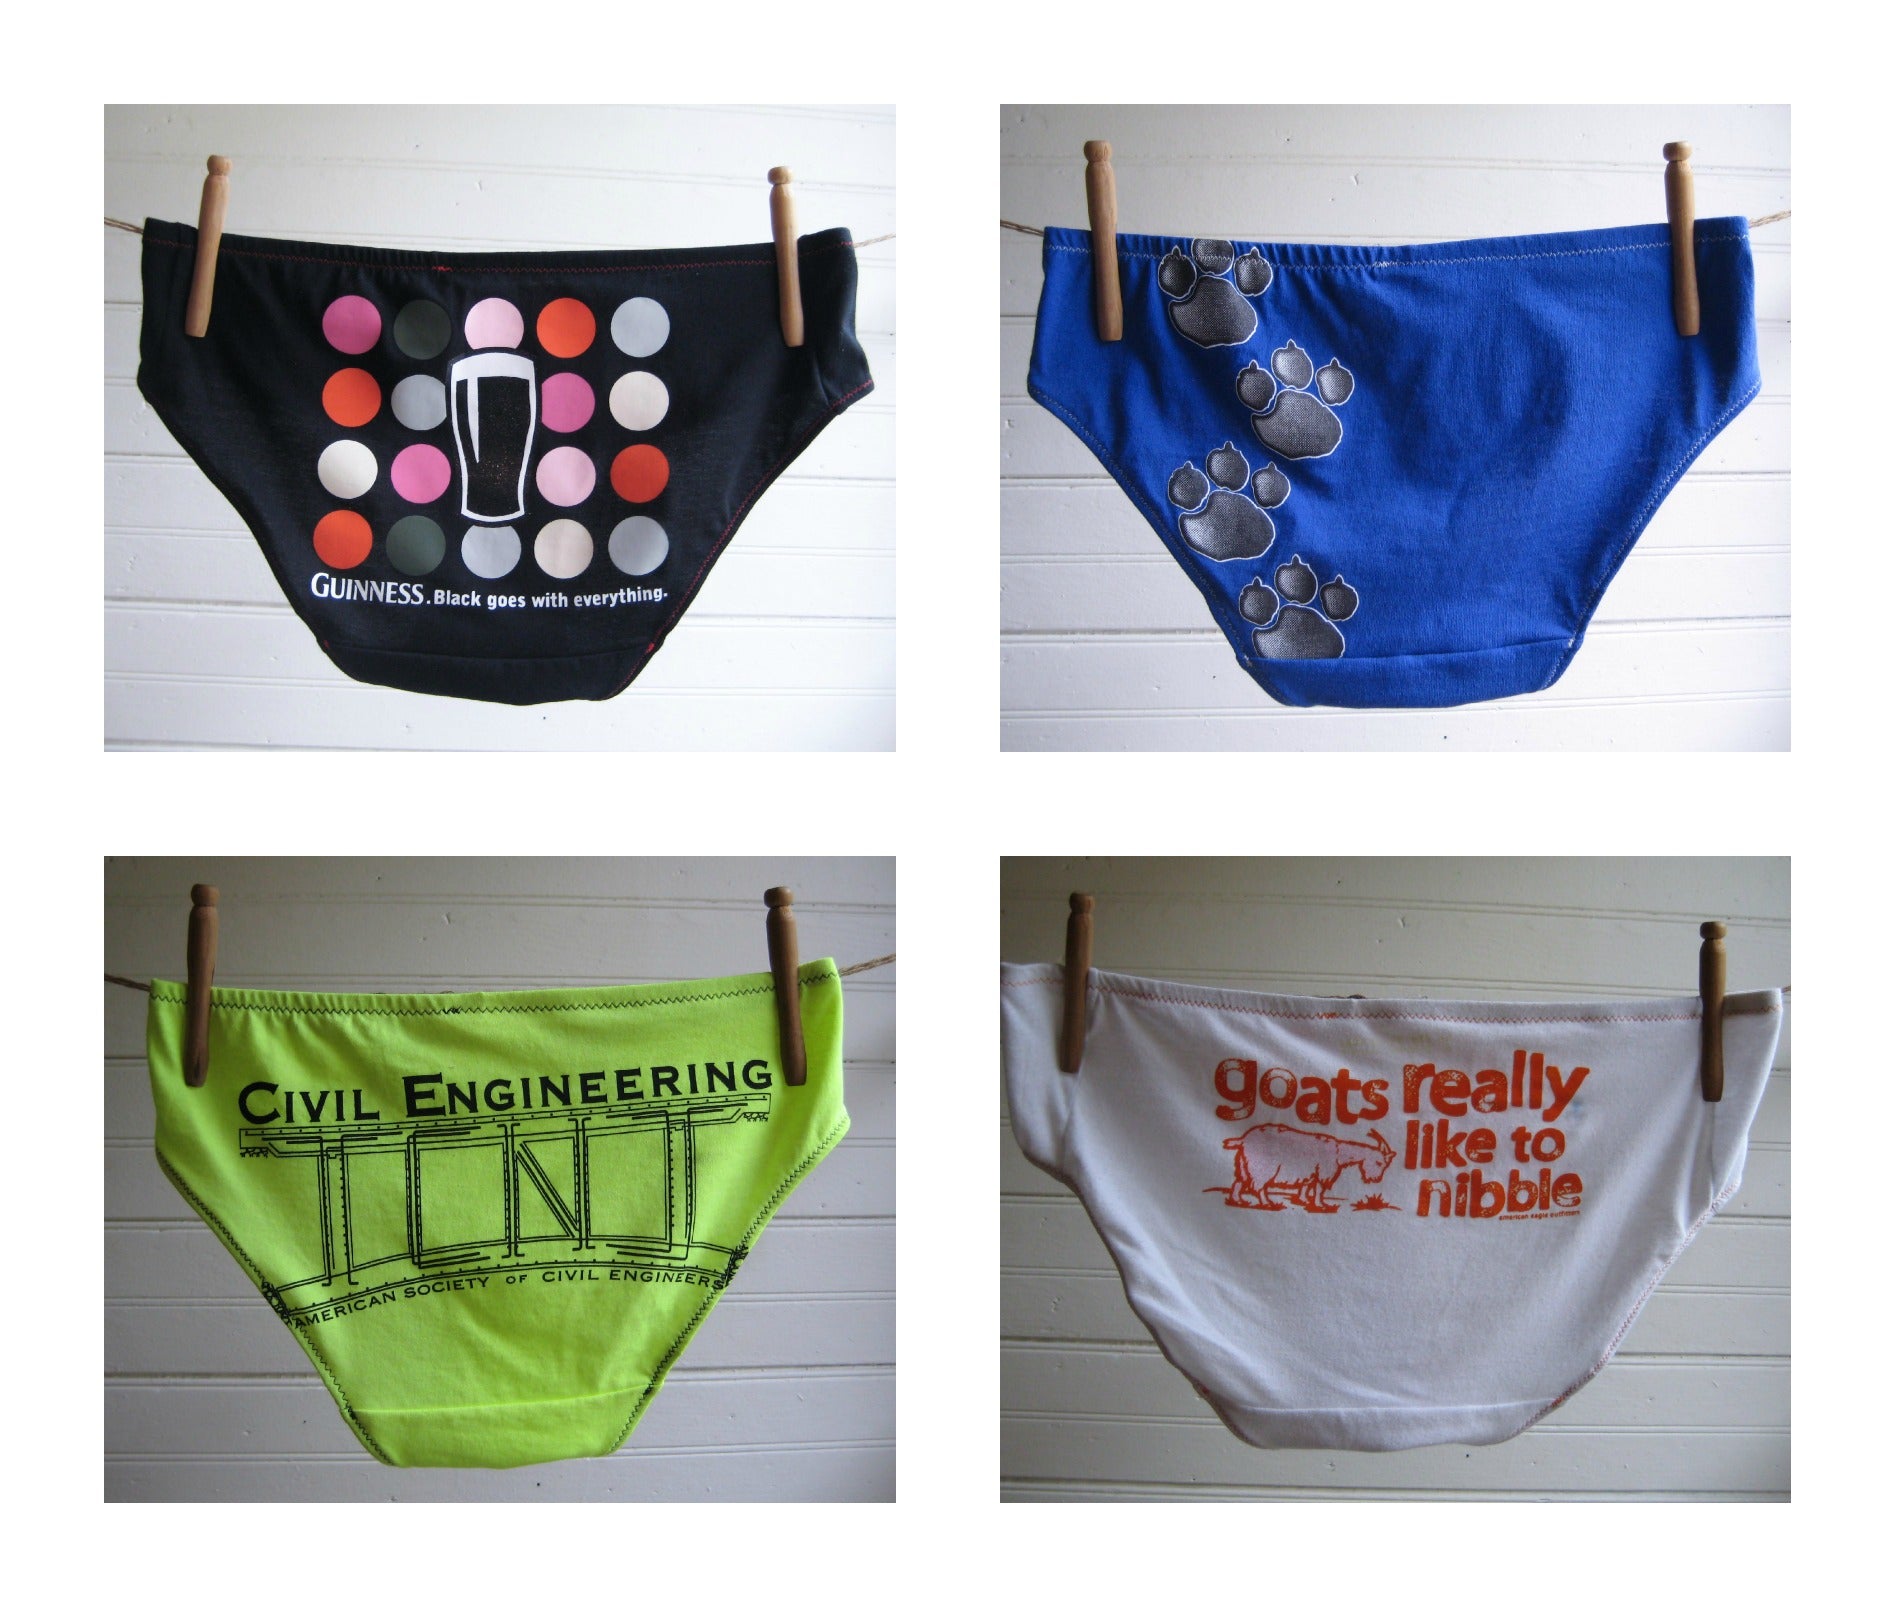 Spring Cleaning with the Underwear of the Month Club